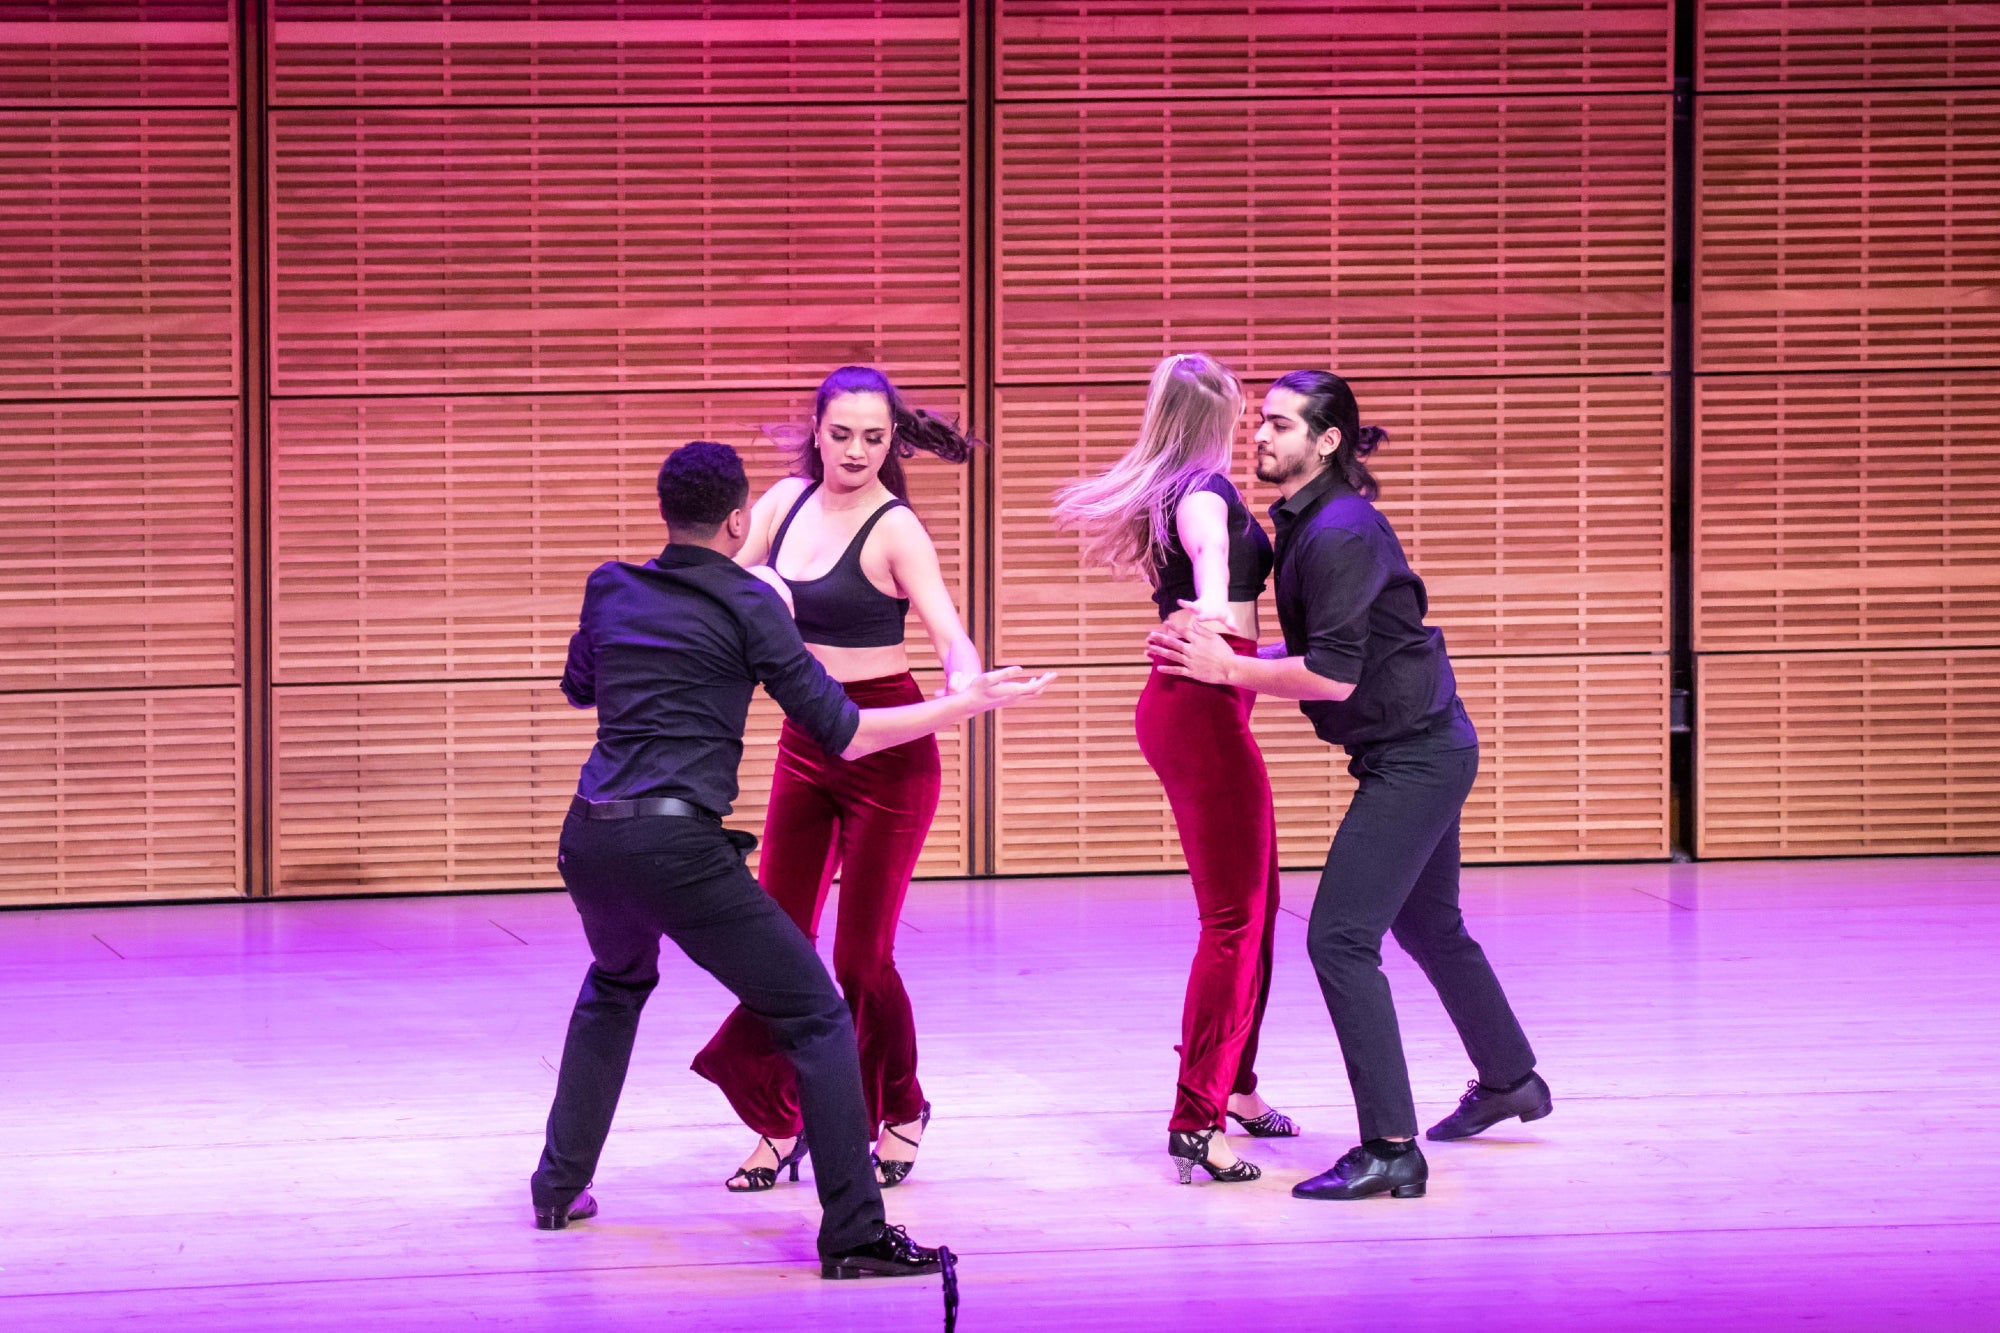 Seven Penn student performing arts groups took the stage at Carnegie Hall in New York City for the Toast to Dear Old Penn showcase on Dec. 10. The event featured Dischord and Penn Yo acapella, Onda Latina (above) and Penn Dhamaka dance, Bloomers and Mask and Wig comedy troupes, and the spoken-word Excelano Project.